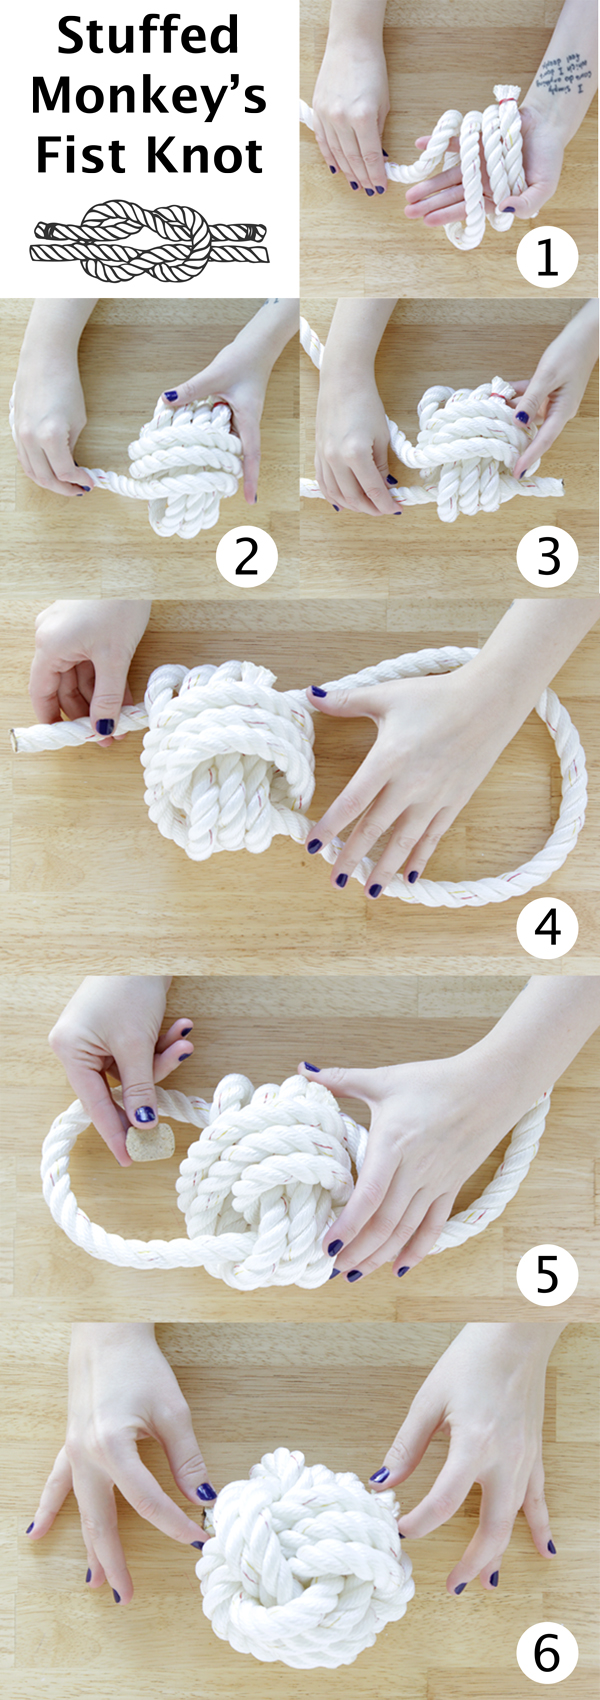 Rope Ball Surprise Dog Toy DIY at Hands Occupied